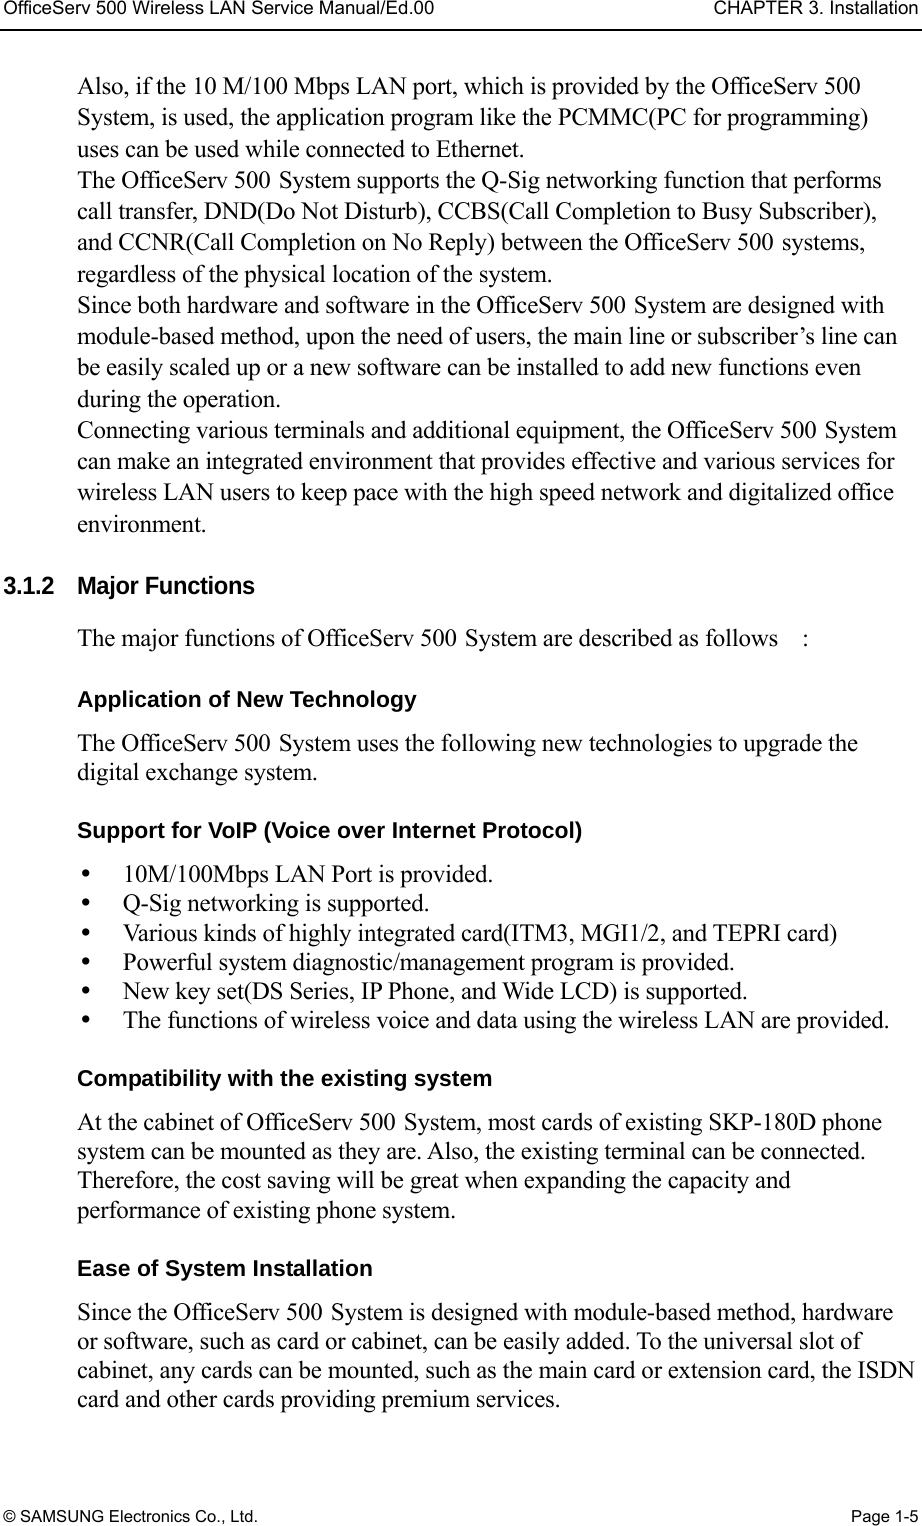 OfficeServ 500 Wireless LAN Service Manual/Ed.00  CHAPTER 3. Installation © SAMSUNG Electronics Co., Ltd.  Page 1-5 Also, if the 10 M/100 Mbps LAN port, which is provided by the OfficeServ 500 System, is used, the application program like the PCMMC(PC for programming) uses can be used while connected to Ethernet. The OfficeServ 500 System supports the Q-Sig networking function that performs call transfer, DND(Do Not Disturb), CCBS(Call Completion to Busy Subscriber), and CCNR(Call Completion on No Reply) between the OfficeServ 500 systems, regardless of the physical location of the system. Since both hardware and software in the OfficeServ 500 System are designed with module-based method, upon the need of users, the main line or subscriber’s line can be easily scaled up or a new software can be installed to add new functions even during the operation. Connecting various terminals and additional equipment, the OfficeServ 500 System can make an integrated environment that provides effective and various services for wireless LAN users to keep pace with the high speed network and digitalized office environment.  3.1.2 Major Functions The major functions of OfficeServ 500 System are described as follows    :      Application of New Technology The OfficeServ 500 System uses the following new technologies to upgrade the digital exchange system.    Support for VoIP (Voice over Internet Protocol)     10M/100Mbps LAN Port is provided.     Q-Sig networking is supported.   Various kinds of highly integrated card(ITM3, MGI1/2, and TEPRI card)     Powerful system diagnostic/management program is provided.     New key set(DS Series, IP Phone, and Wide LCD) is supported.   The functions of wireless voice and data using the wireless LAN are provided.    Compatibility with the existing system   At the cabinet of OfficeServ 500 System, most cards of existing SKP-180D phone system can be mounted as they are. Also, the existing terminal can be connected. Therefore, the cost saving will be great when expanding the capacity and performance of existing phone system.    Ease of System Installation   Since the OfficeServ 500 System is designed with module-based method, hardware or software, such as card or cabinet, can be easily added. To the universal slot of cabinet, any cards can be mounted, such as the main card or extension card, the ISDN card and other cards providing premium services.   